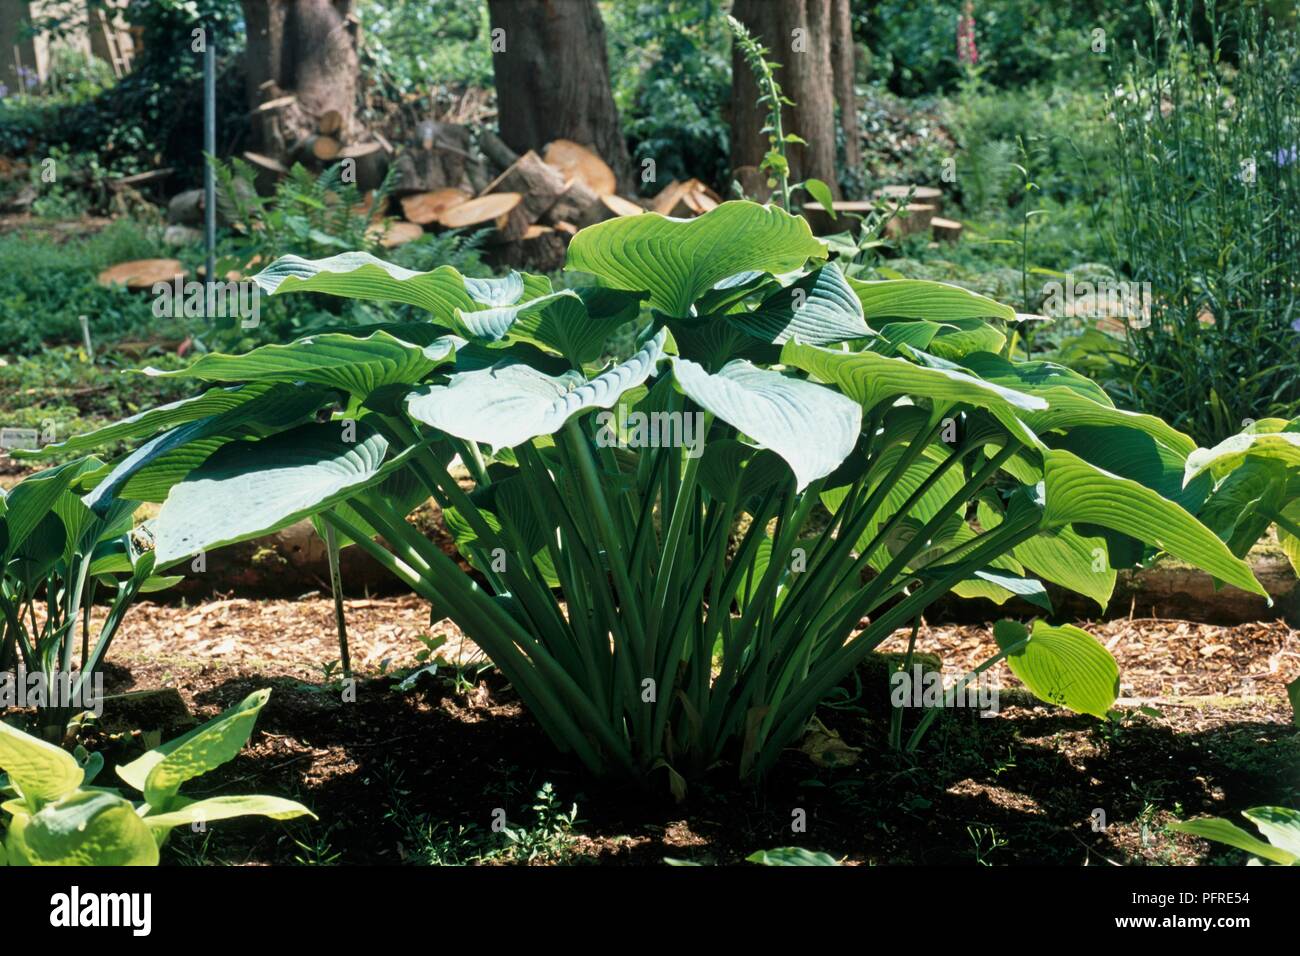 Hosta 'Blue Angel' with large green leaves on upright stems growing from centre Stock Photo